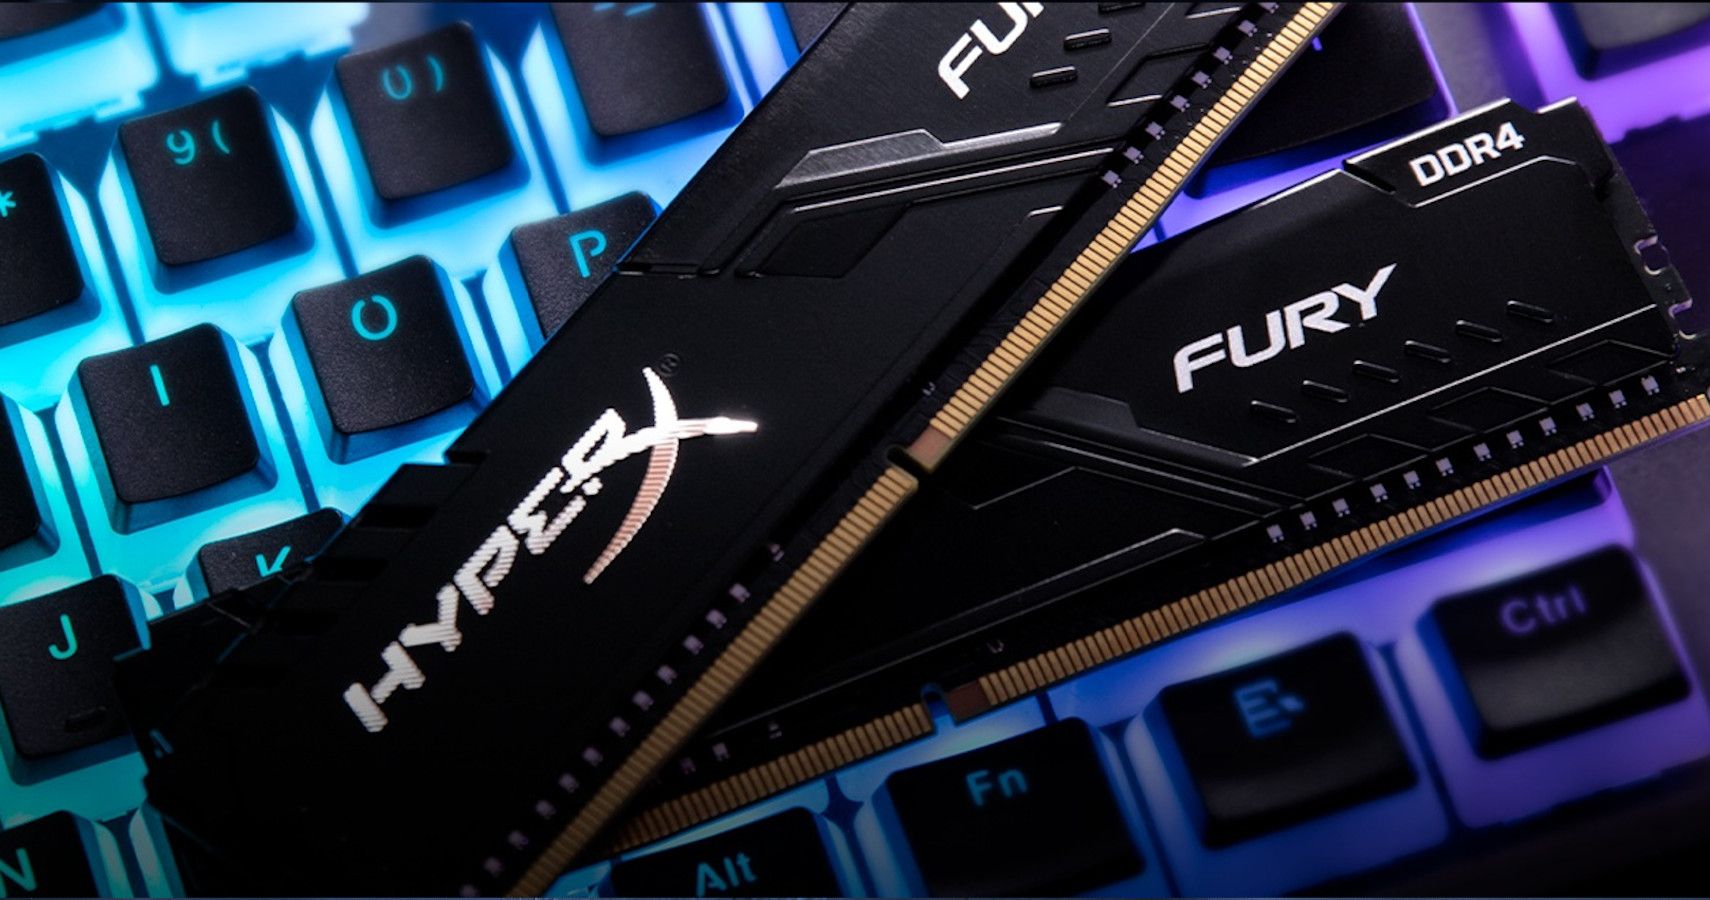 HyperX Fury DDR4 Memory Review: Simple, Affordable, And Reliable